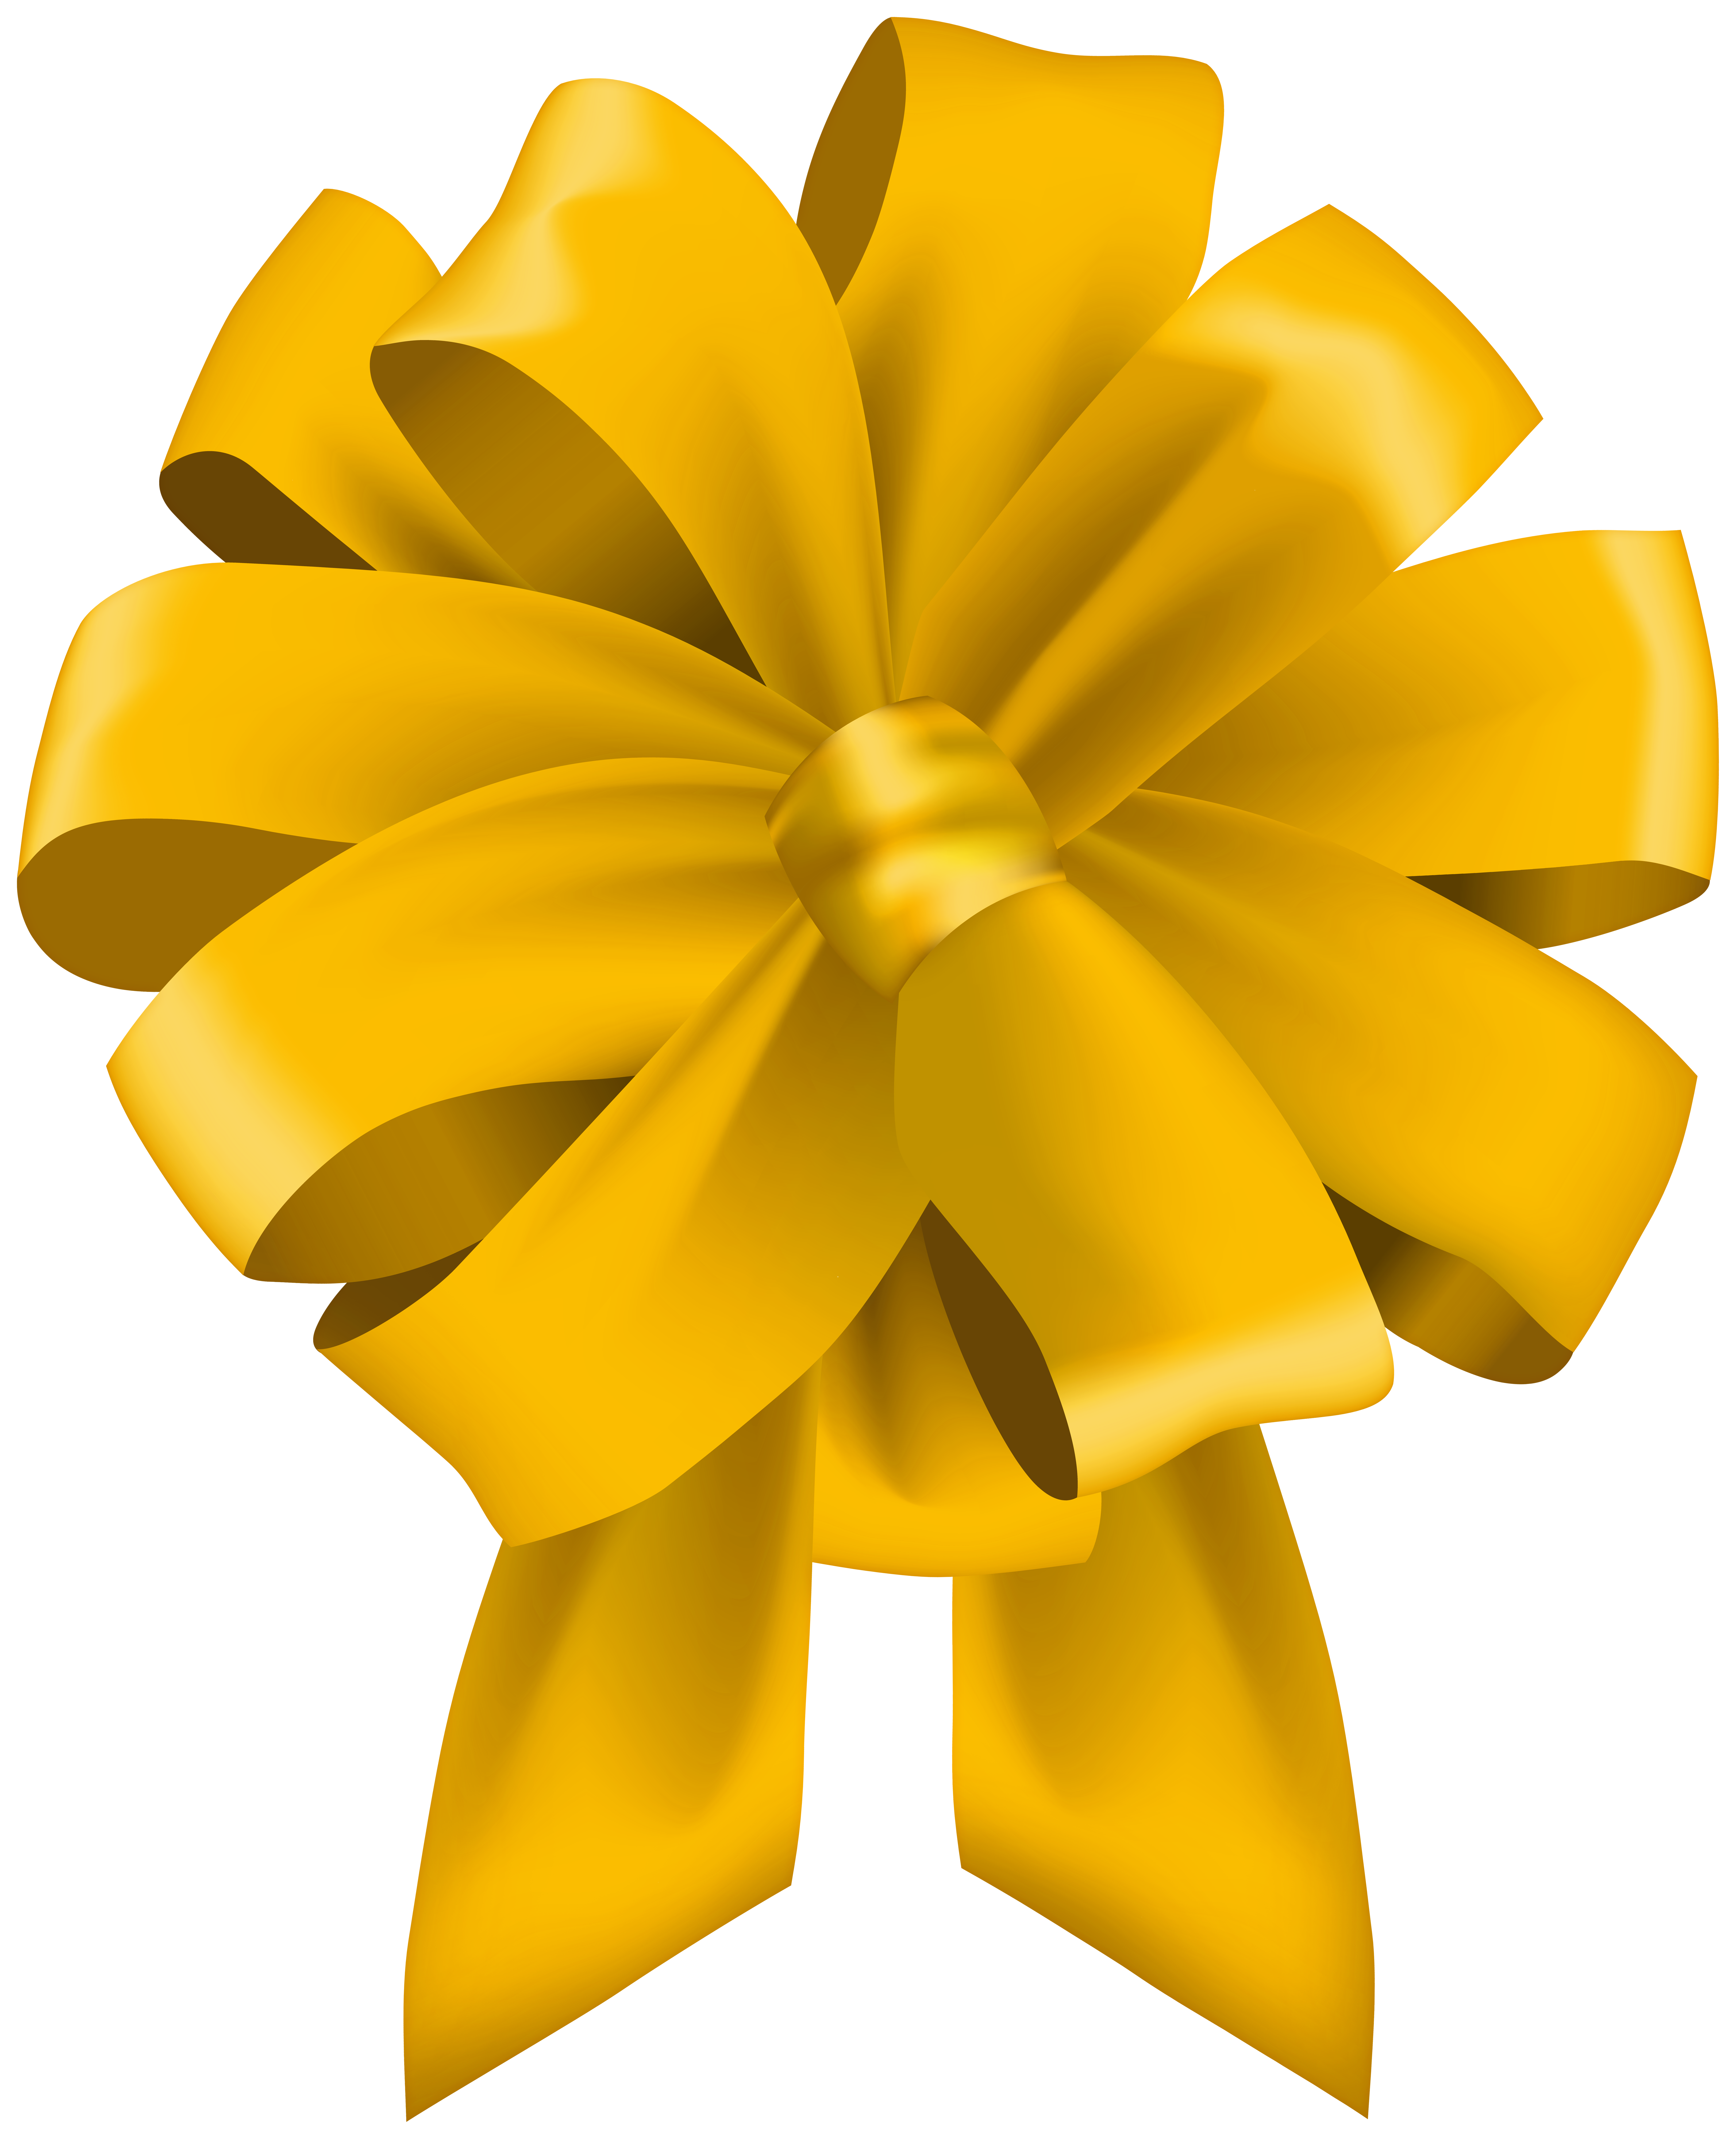 Free: Bows , yellow ribbon transparent background PNG clipart 